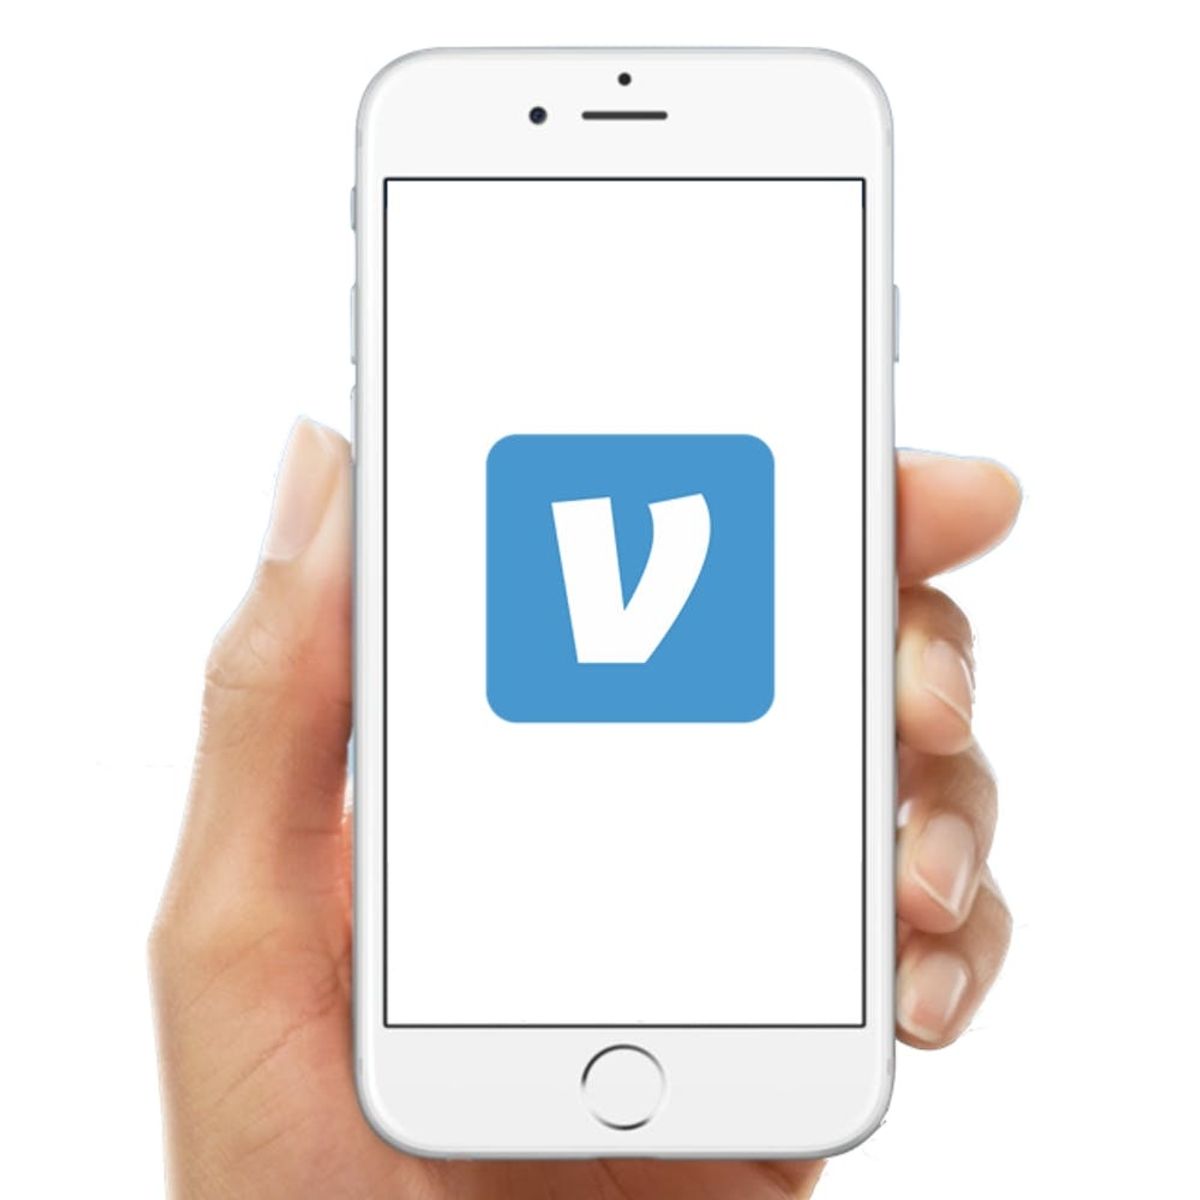 Big Banks Are Teaming Up to End Venmo With This App